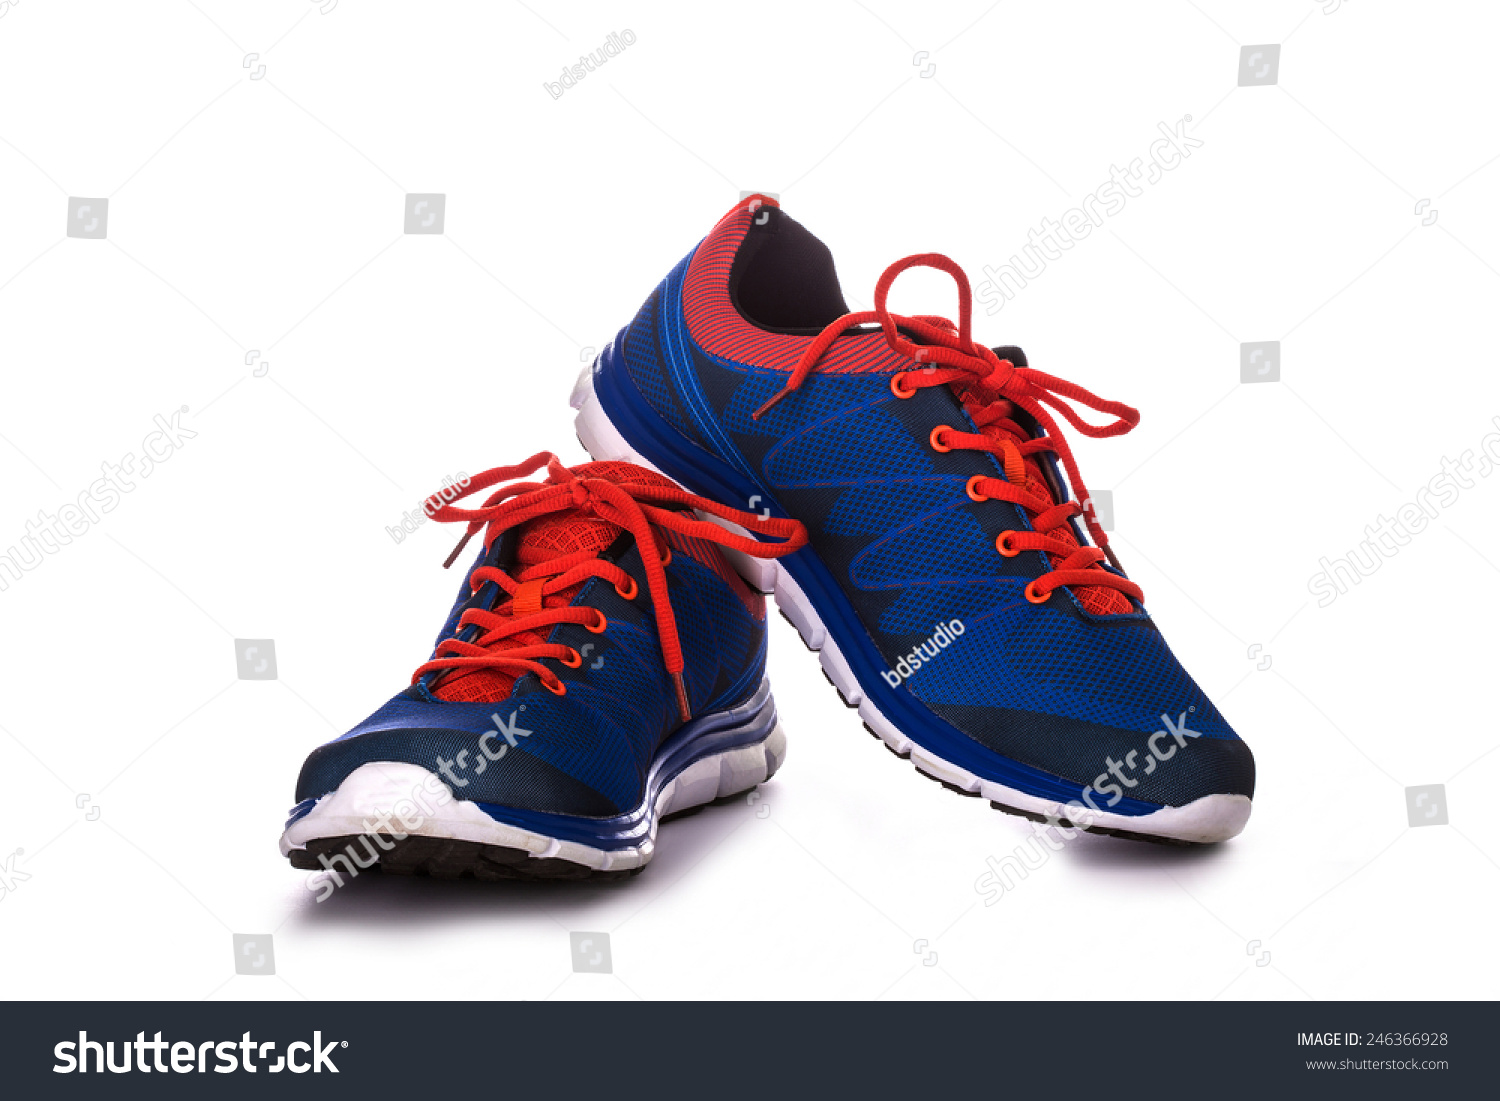 Unbranded Running Shoe, Sneaker Or Trainer Isolated On White Stock ...